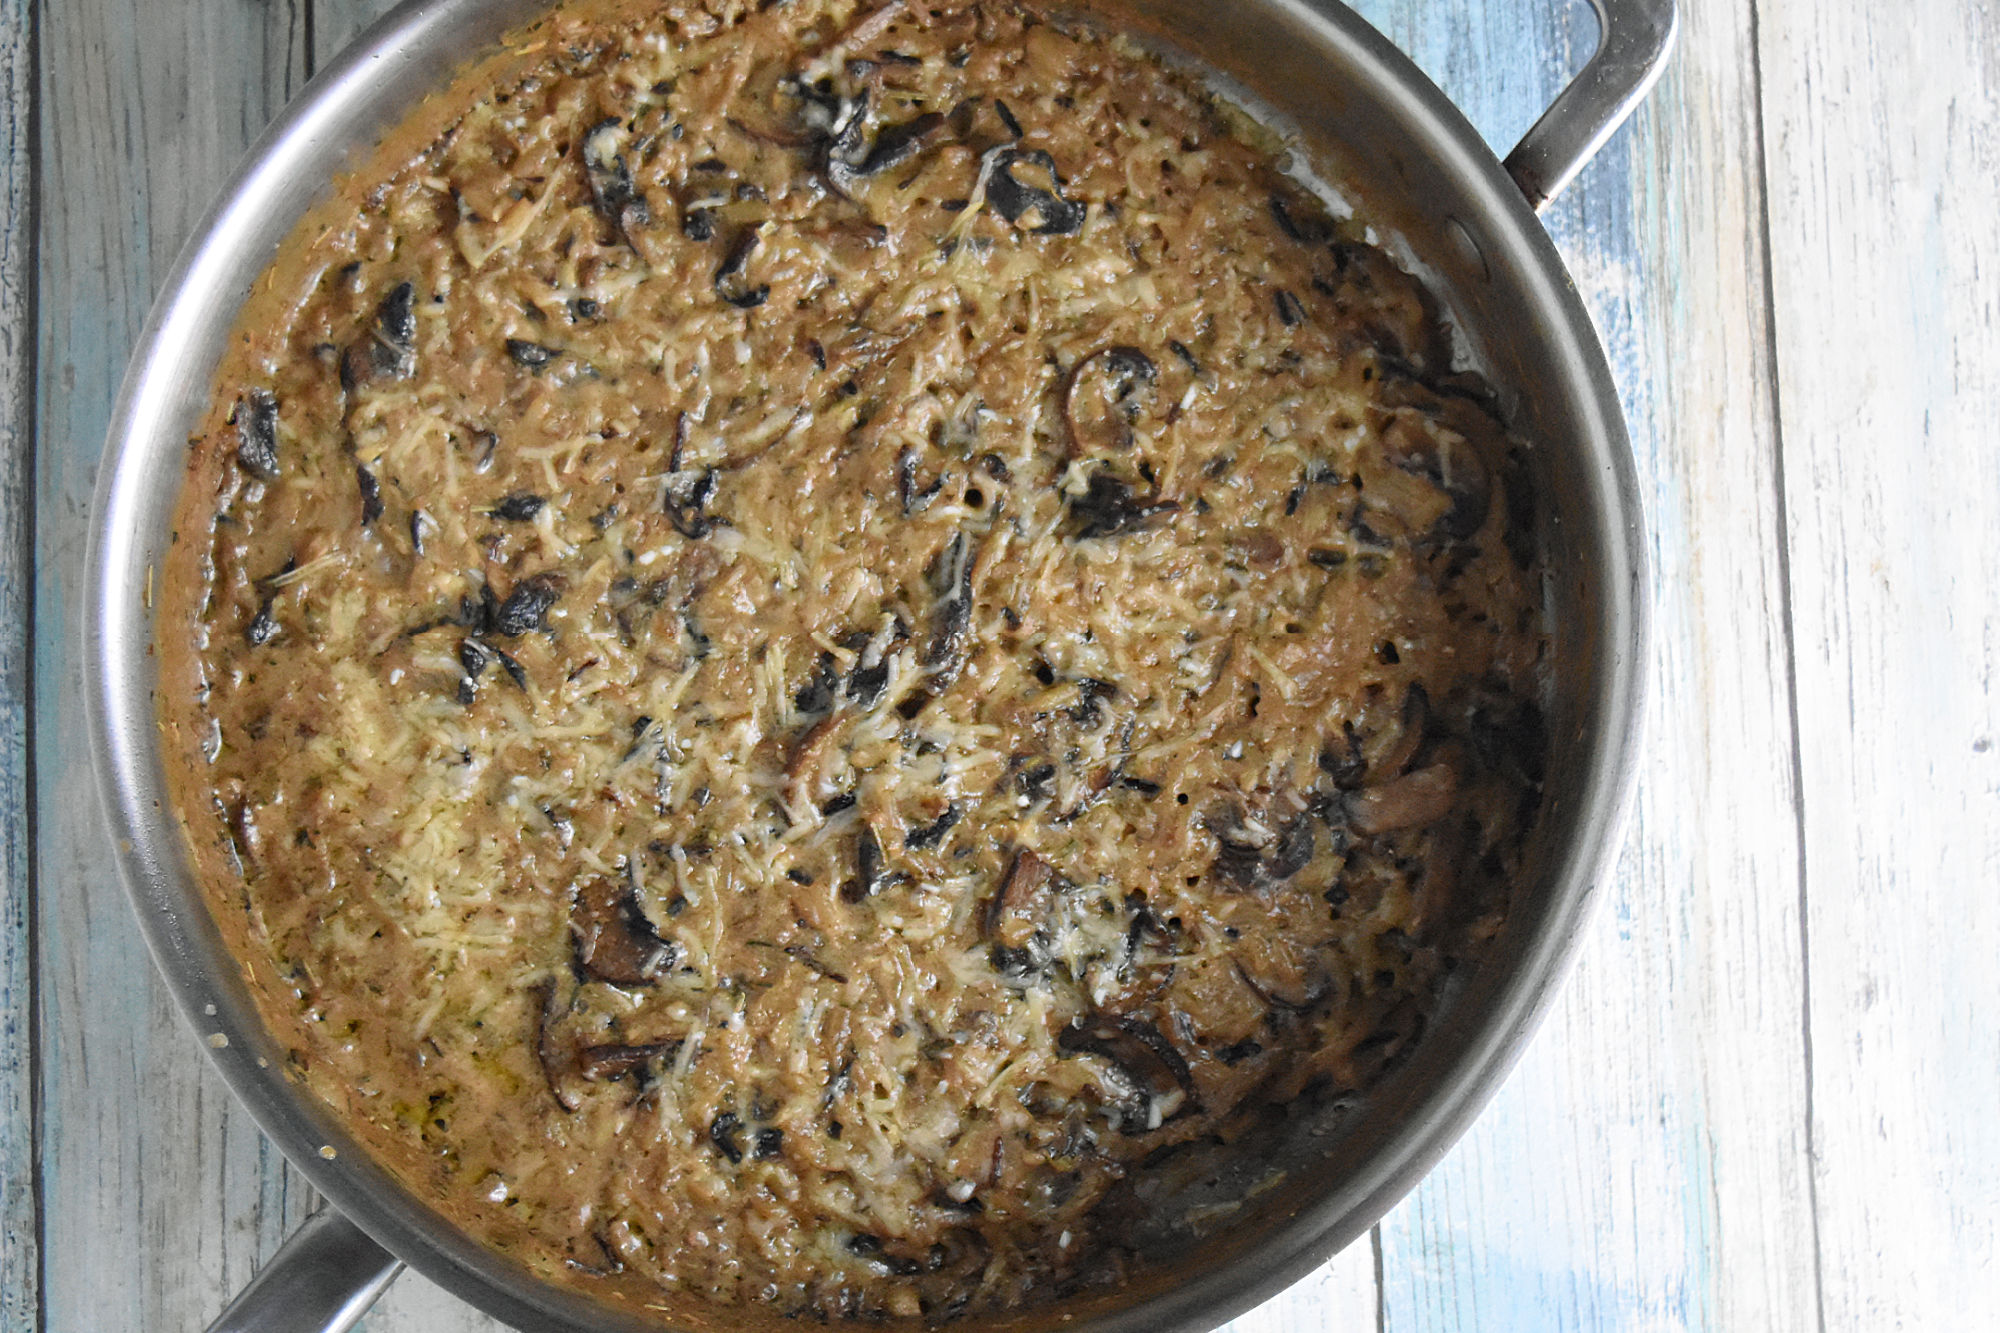 Mushroom and Wild Rice Casserole is packed with mushrooms and cheese.  It’s a quick recipe using boxed rice pilaf mix and cream of mushroom soup.  But there’s no denying it tastes totally homemade. #HolidaySideDishes #ricepilaf #bakedrice #cheesyrice #easyrecipe #sidedish #HolidayRecipe